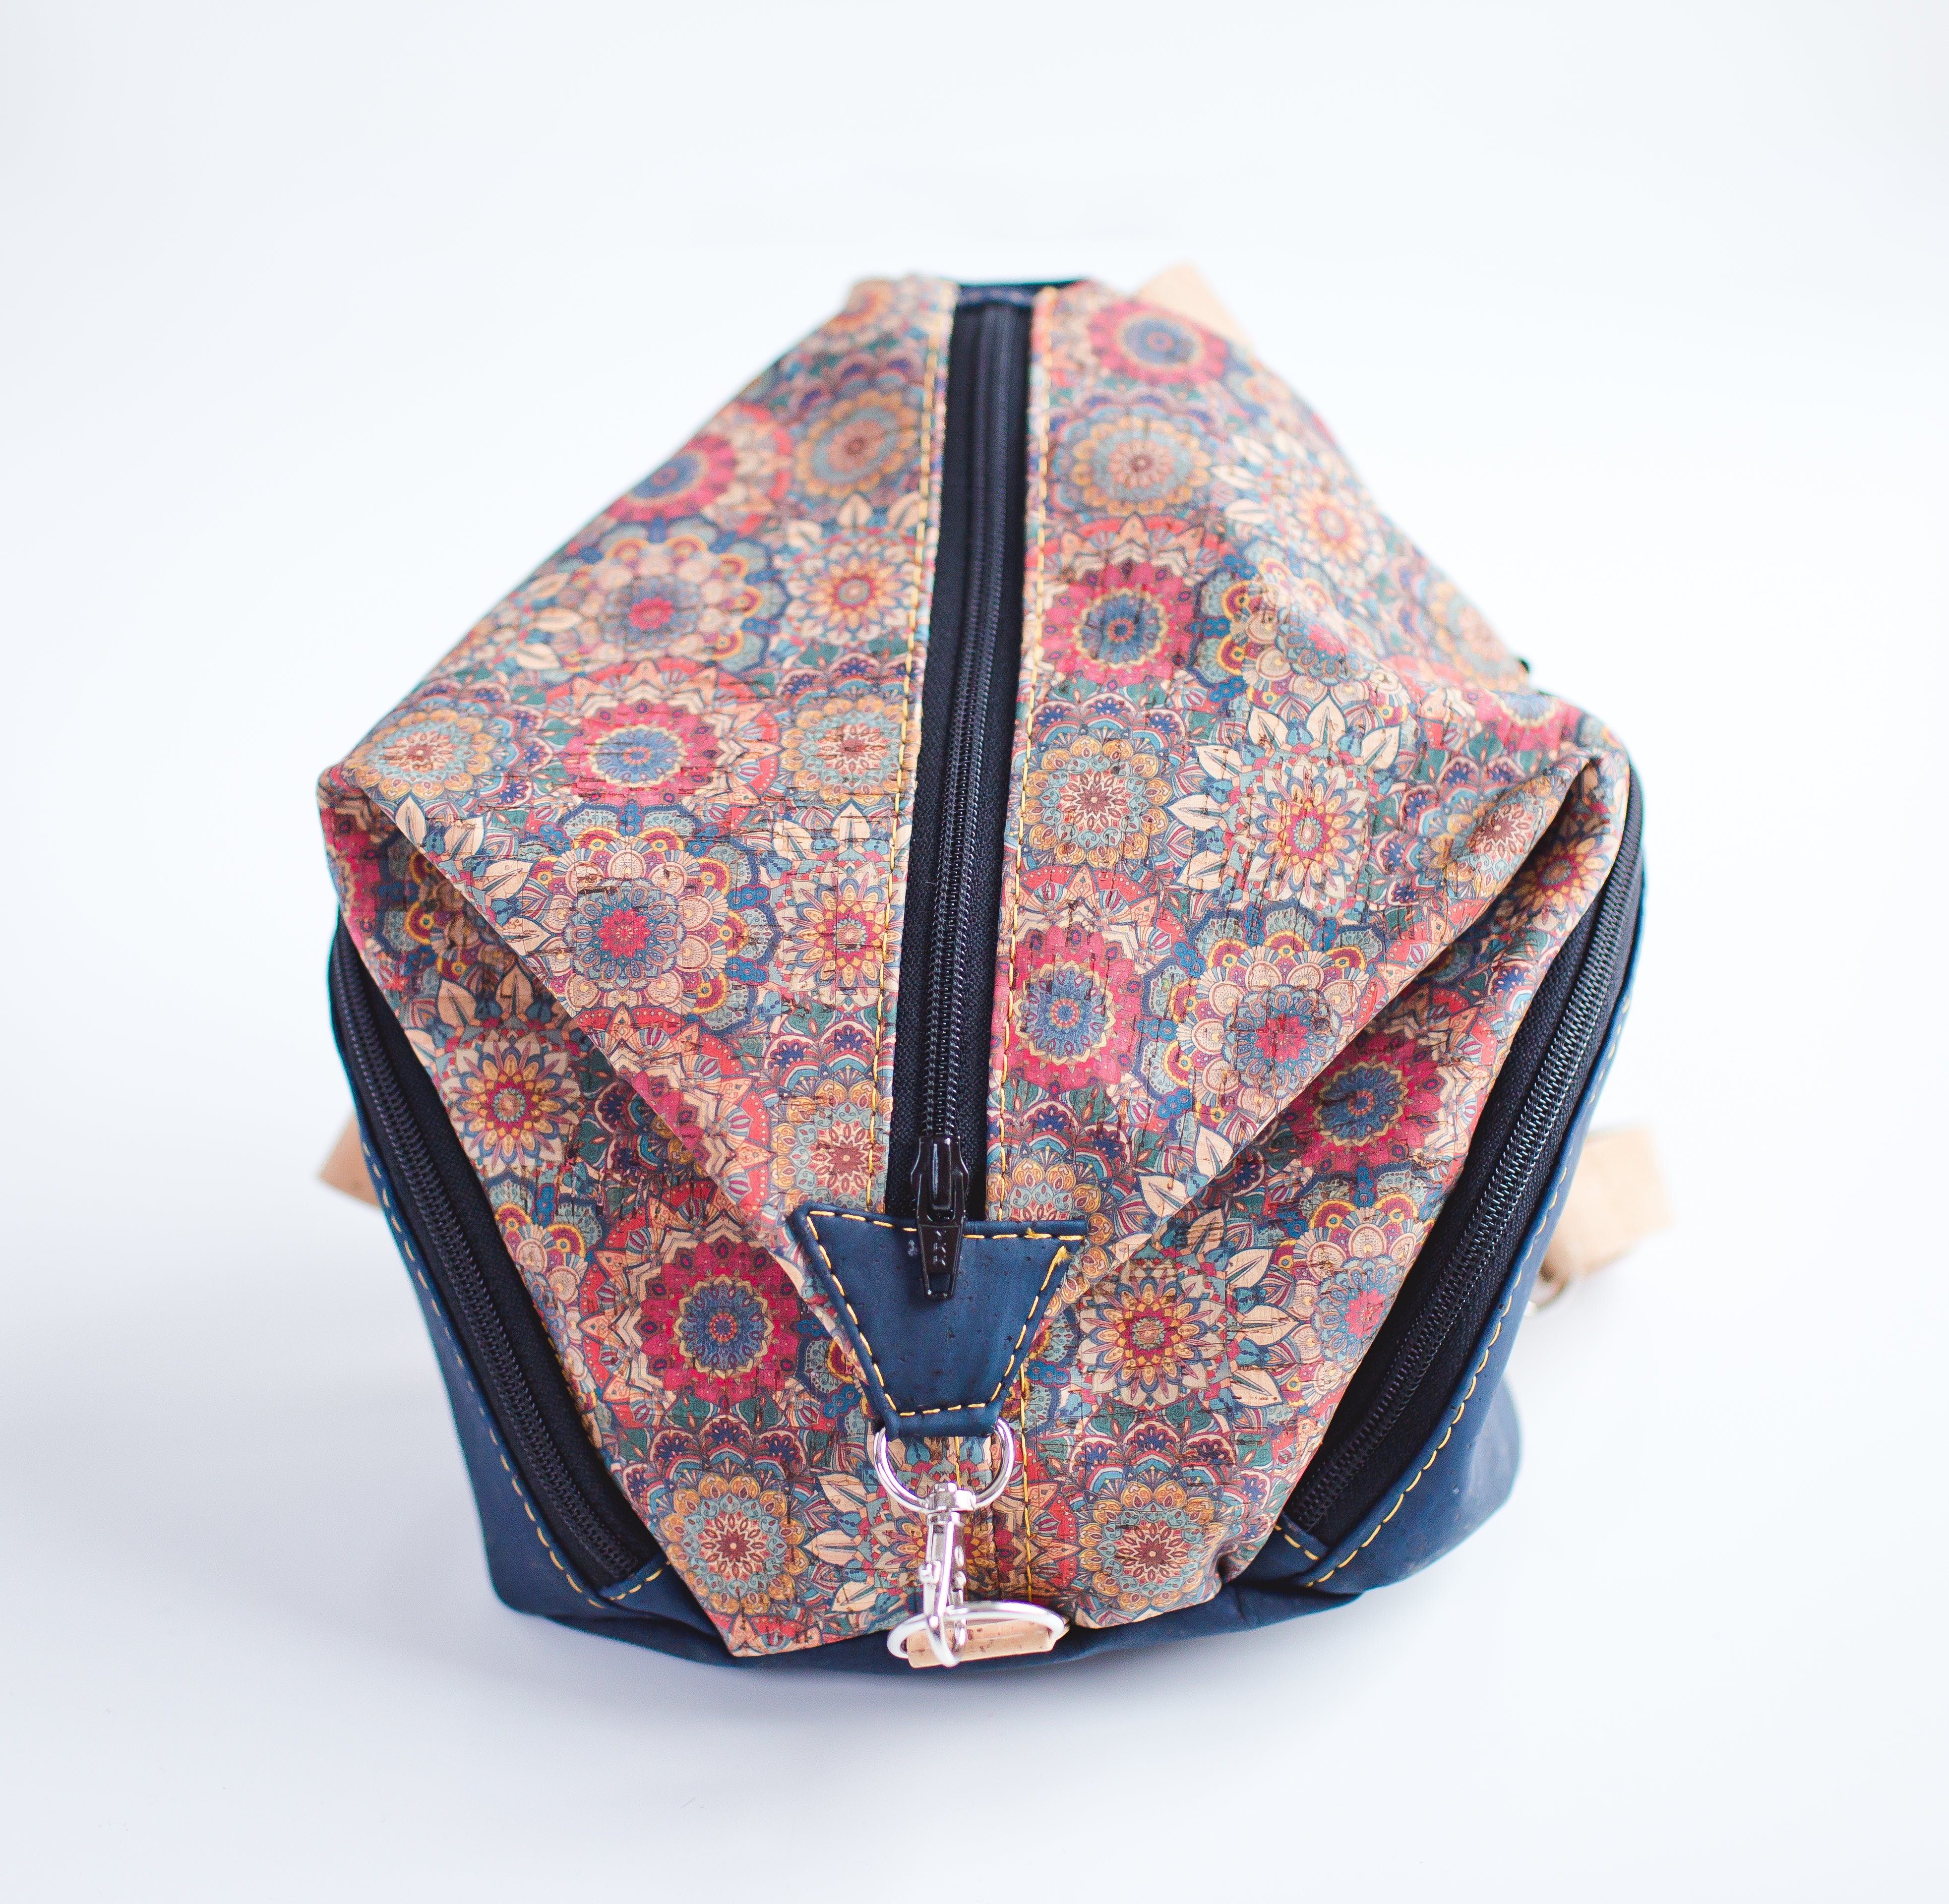 G1-Mini Wesley Backpack in Navy Blue and Red Floral Print - All Cork Backpack Purse